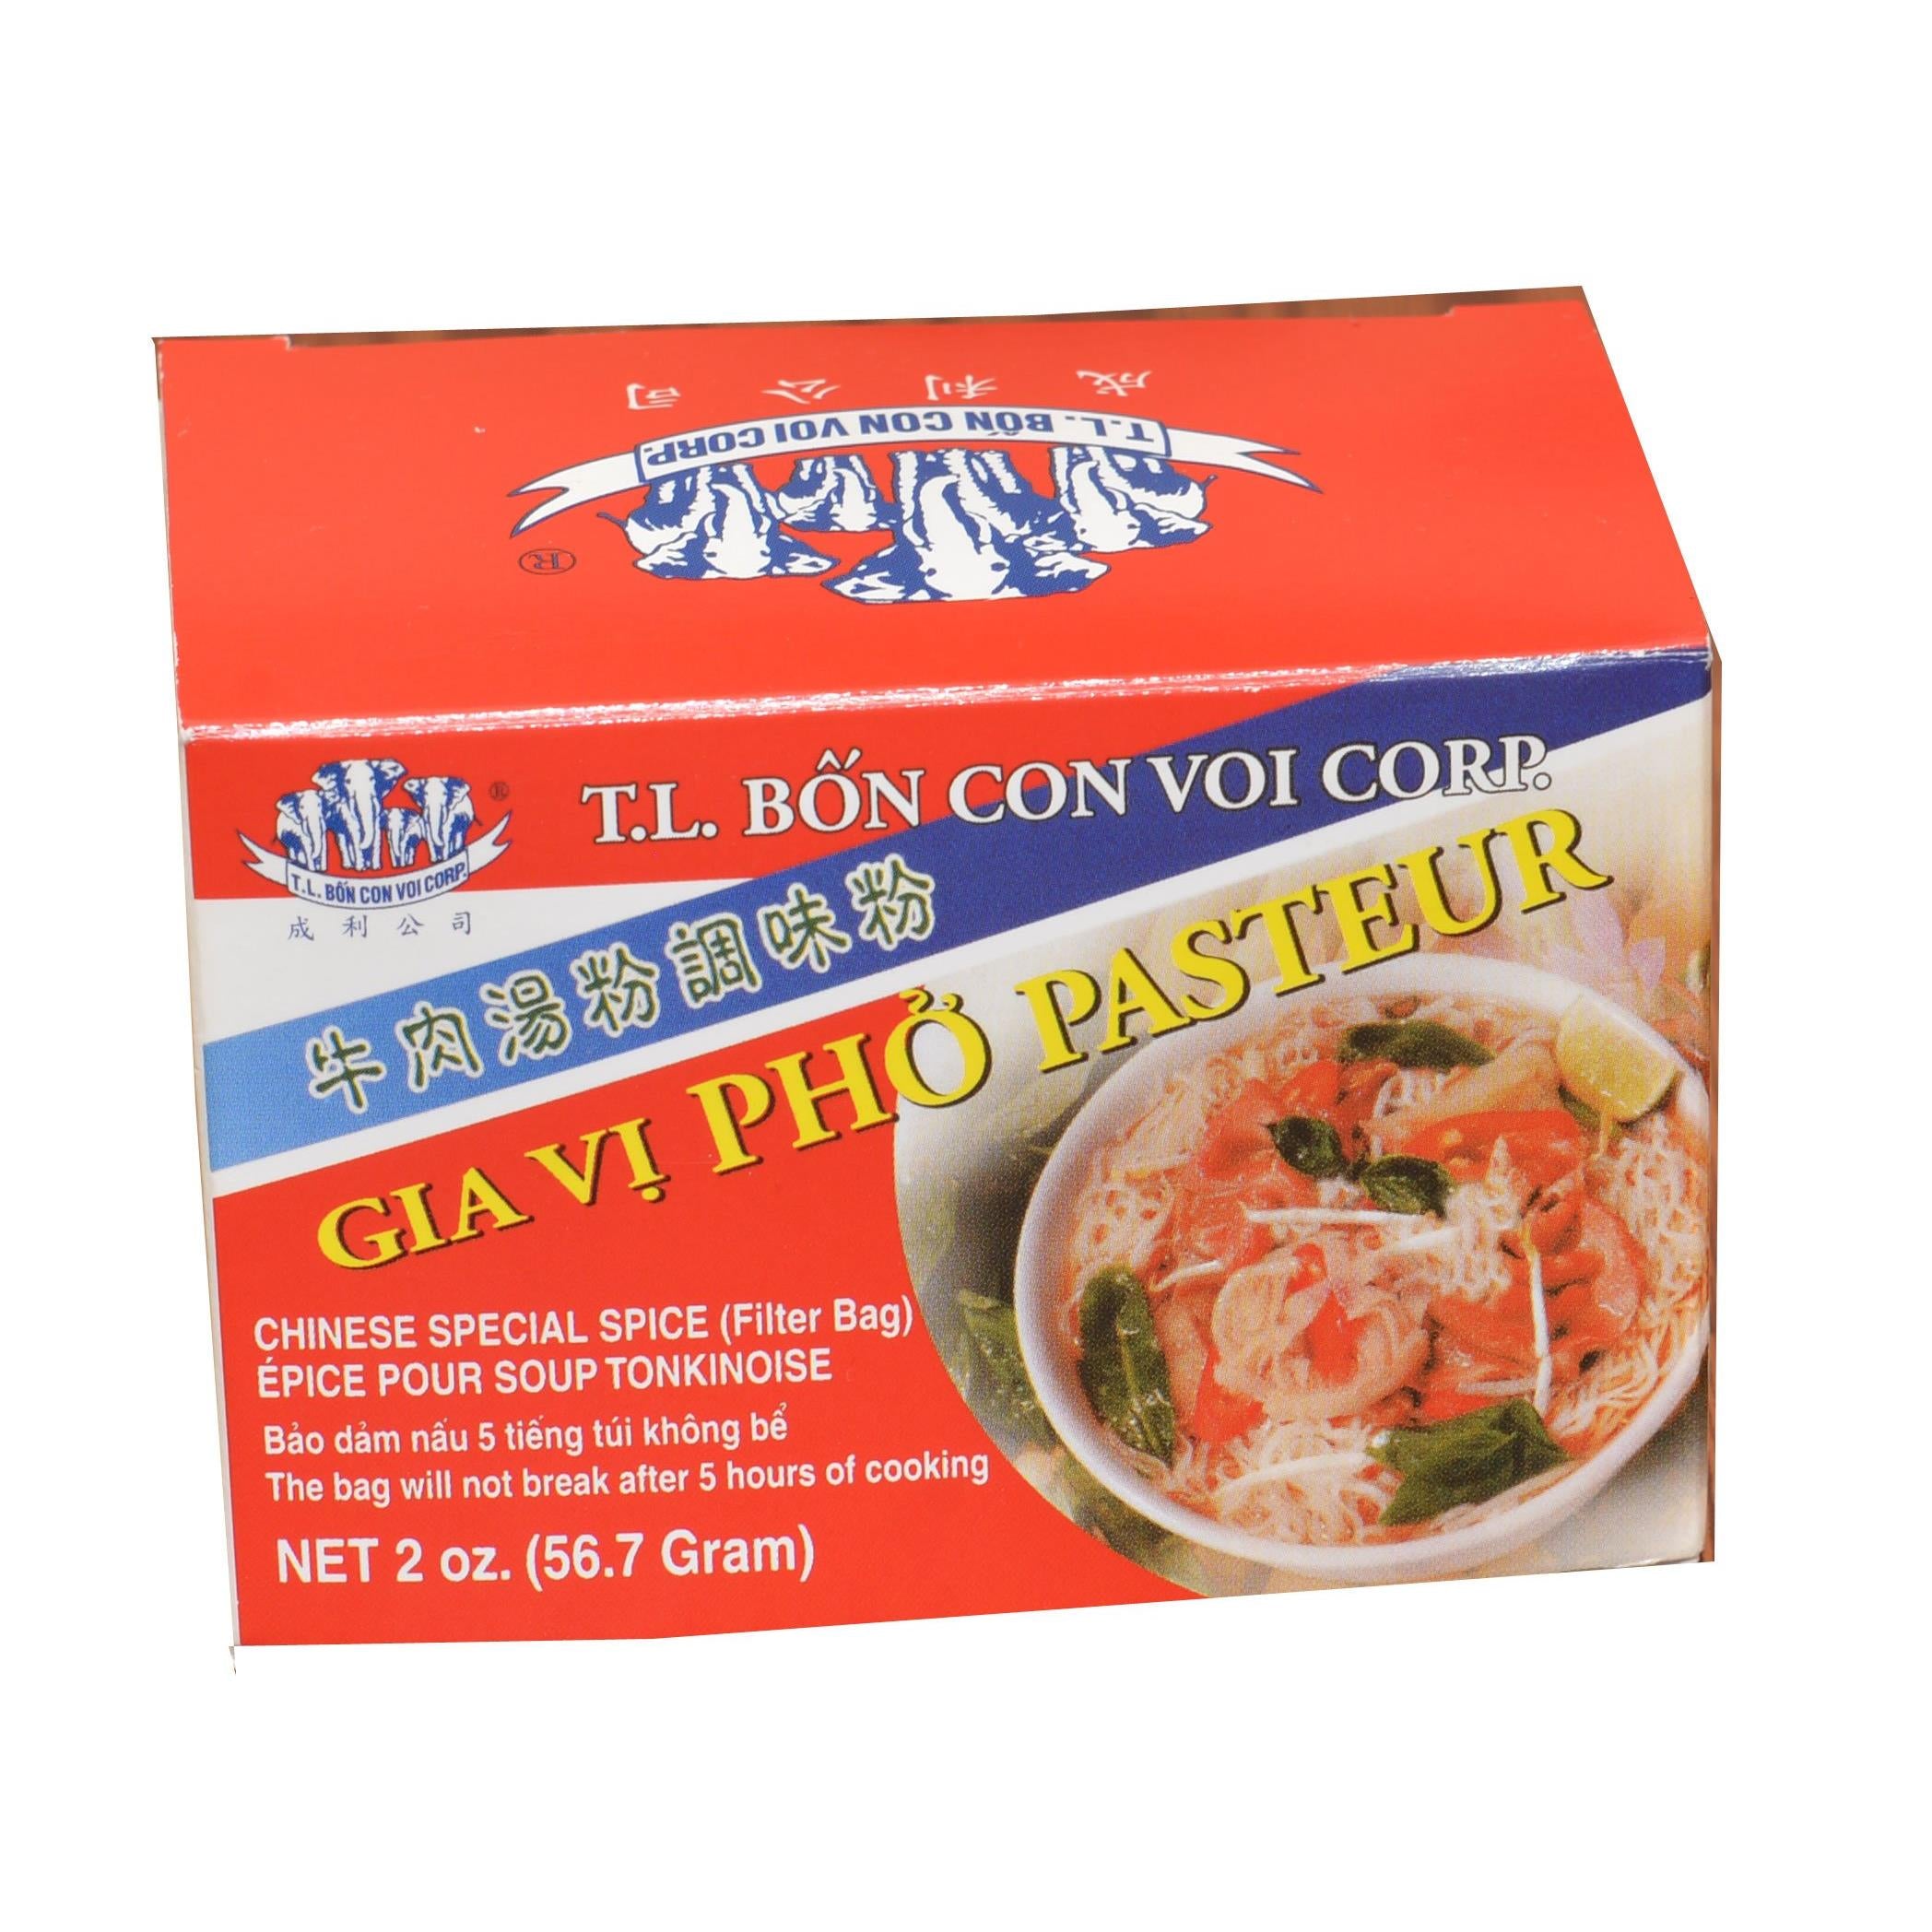 Chinese Special Spice(filter Bag): Gia Vi Pho Pasteur, 2 Oz (Pack of 1)